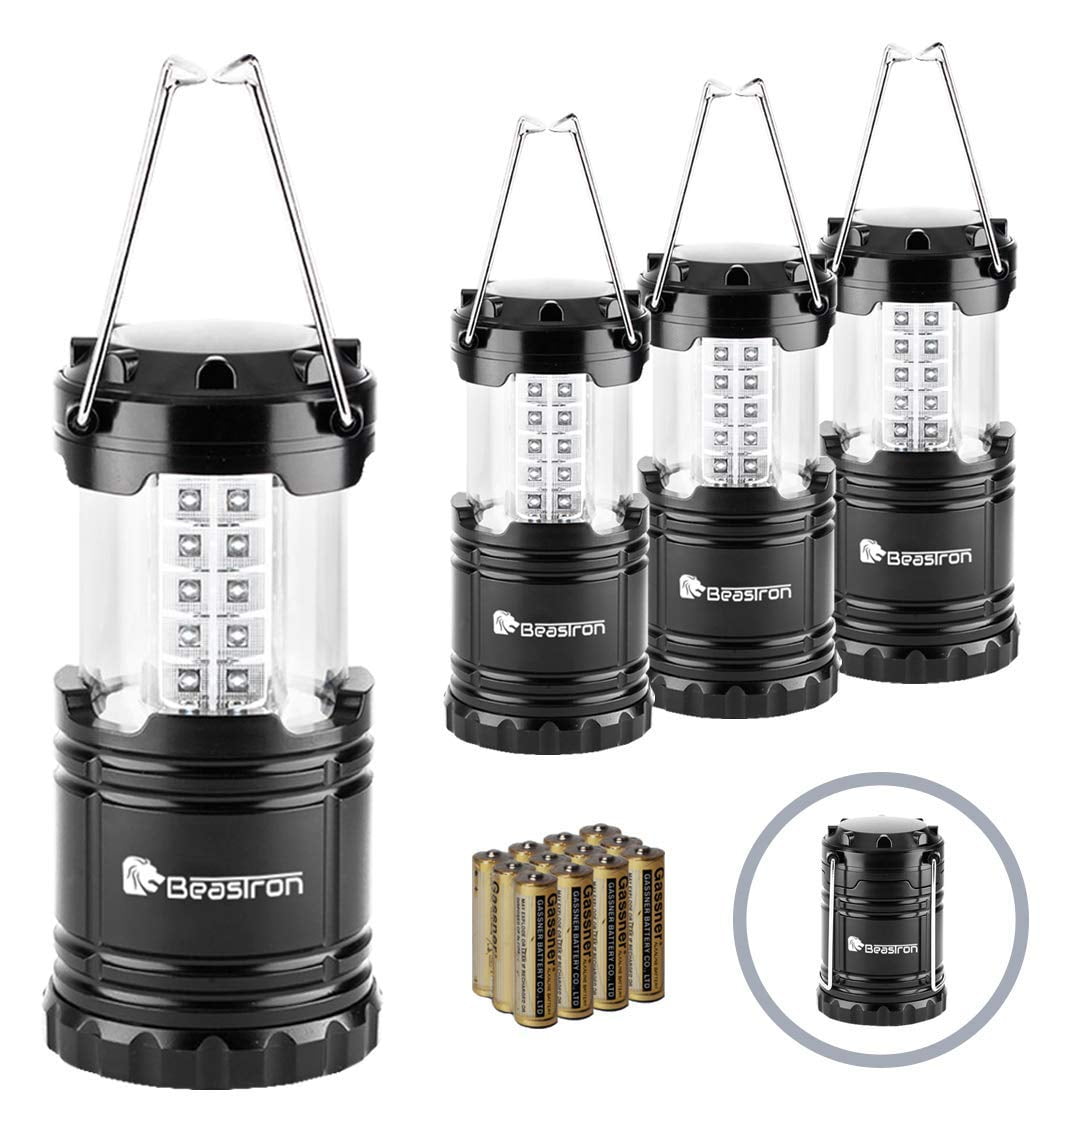 Storms Original Patented Collapsible Camping Lights/Lamp Must Have During Hurricanes Super Bright Portable Lanterns Emergencies LED Camping Lantern Outages